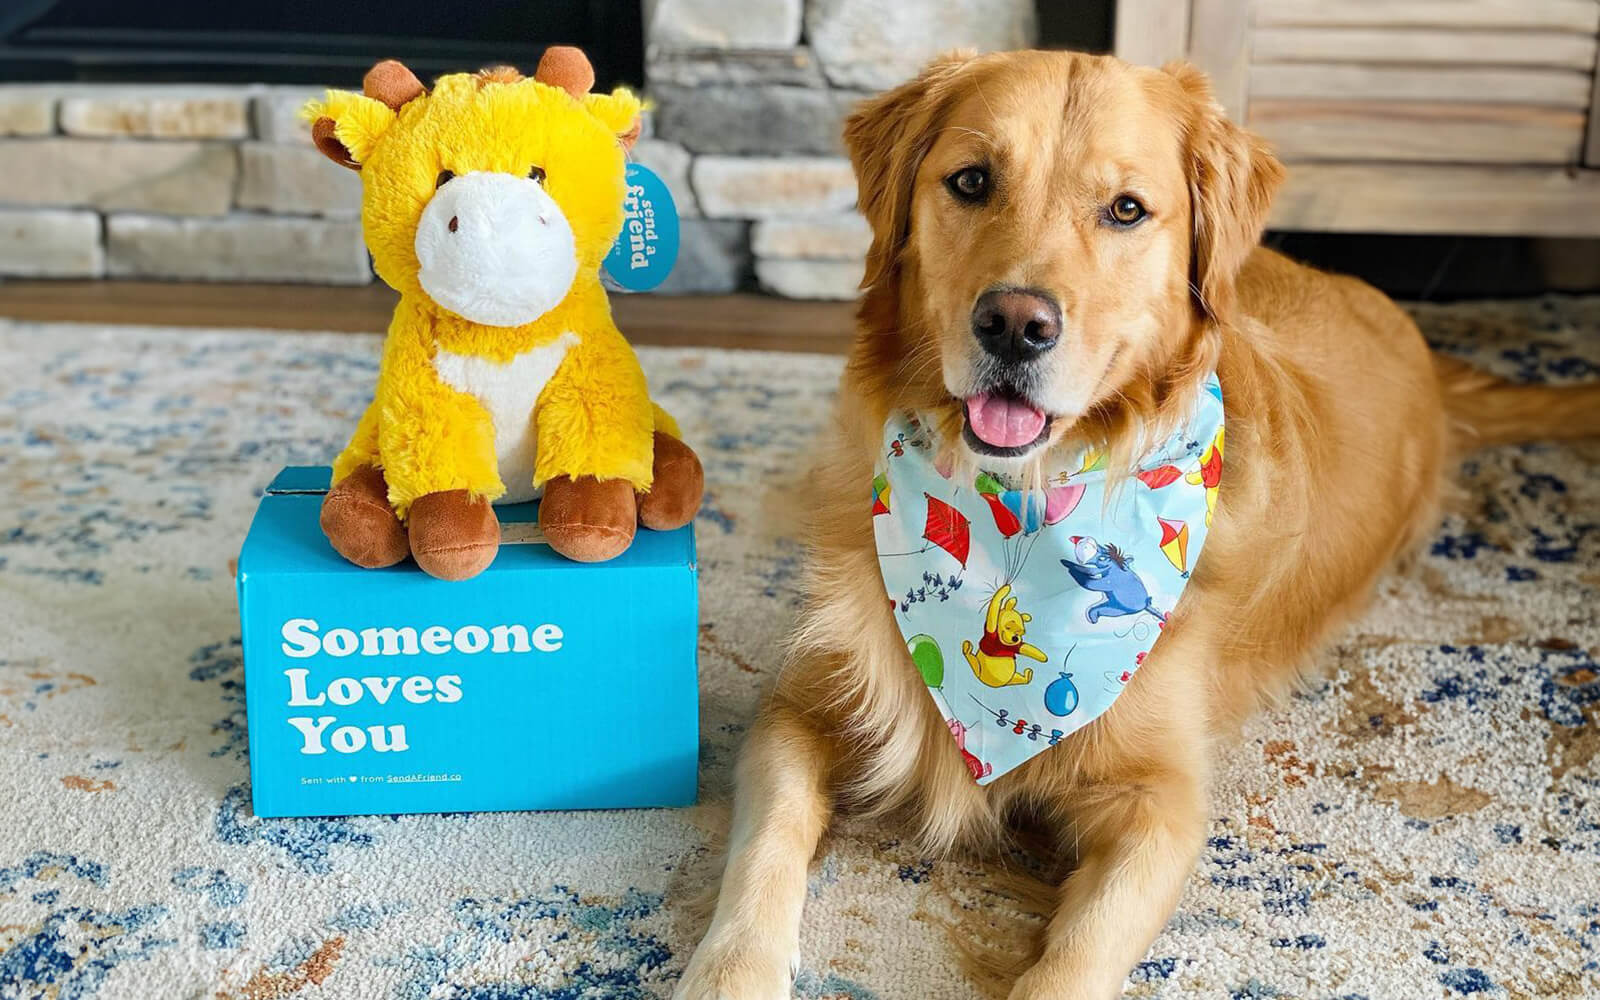 Pictured is George the Giraffe sitting on a Someone Loves You box next to a golden retriever